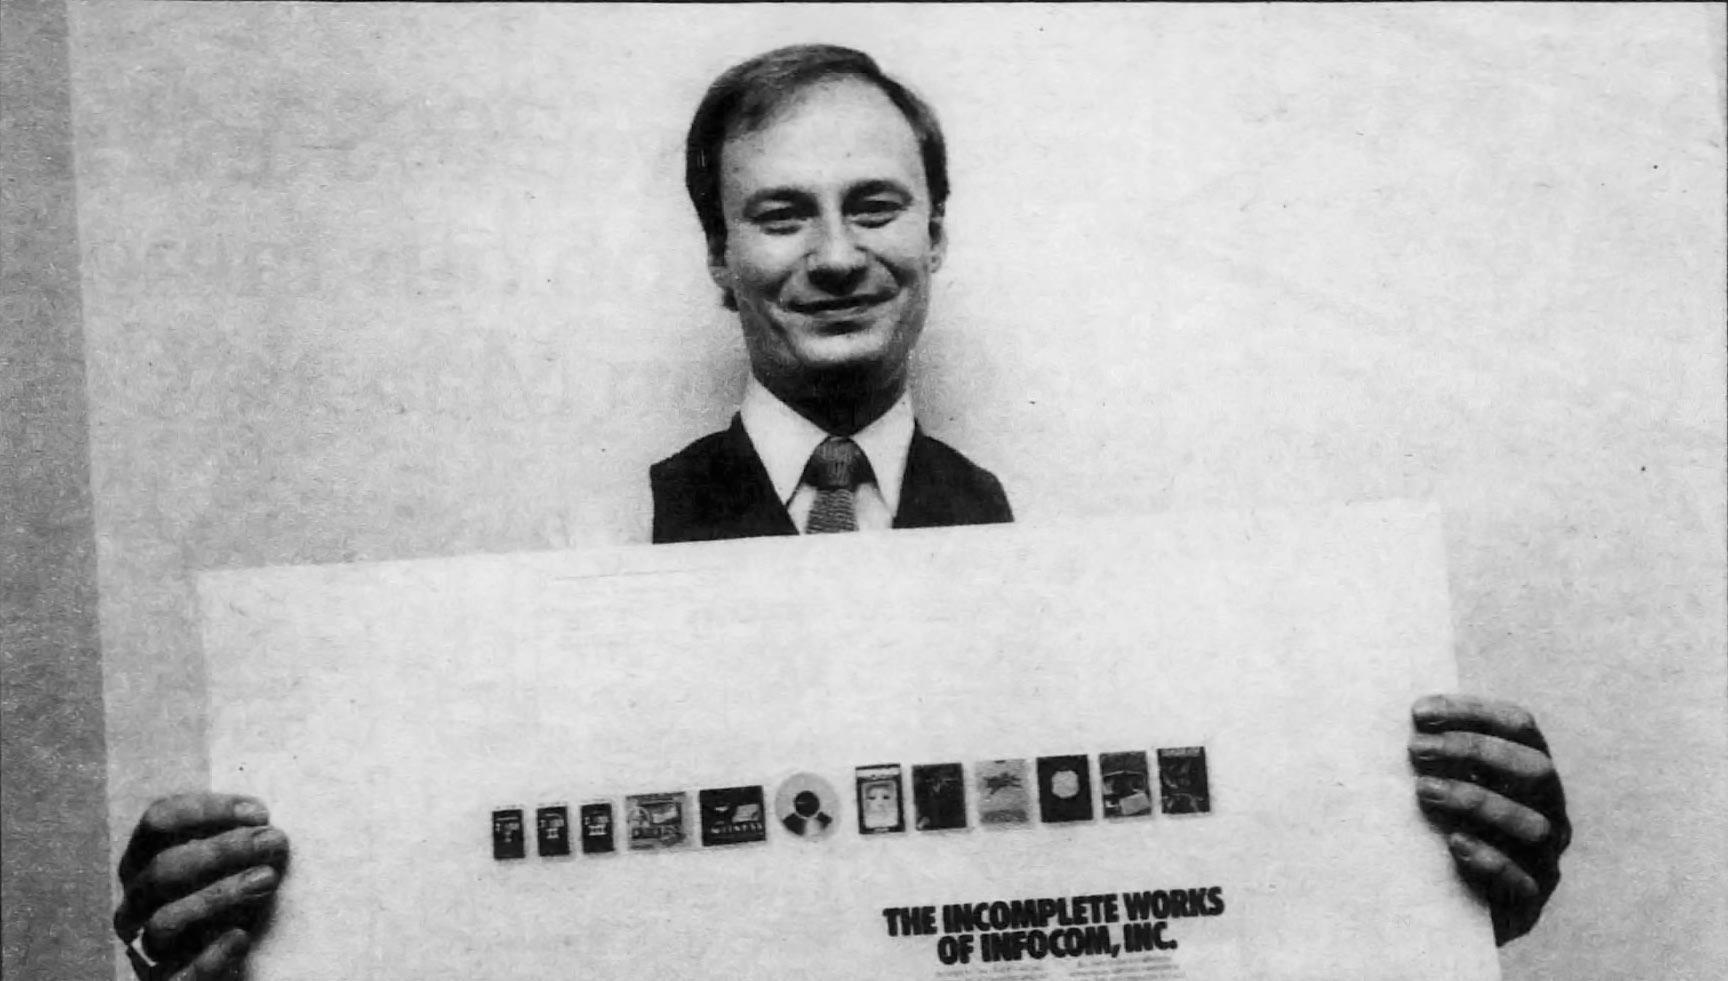 Mike Dornbrook holds an ad for computer text adventure game company Infocom